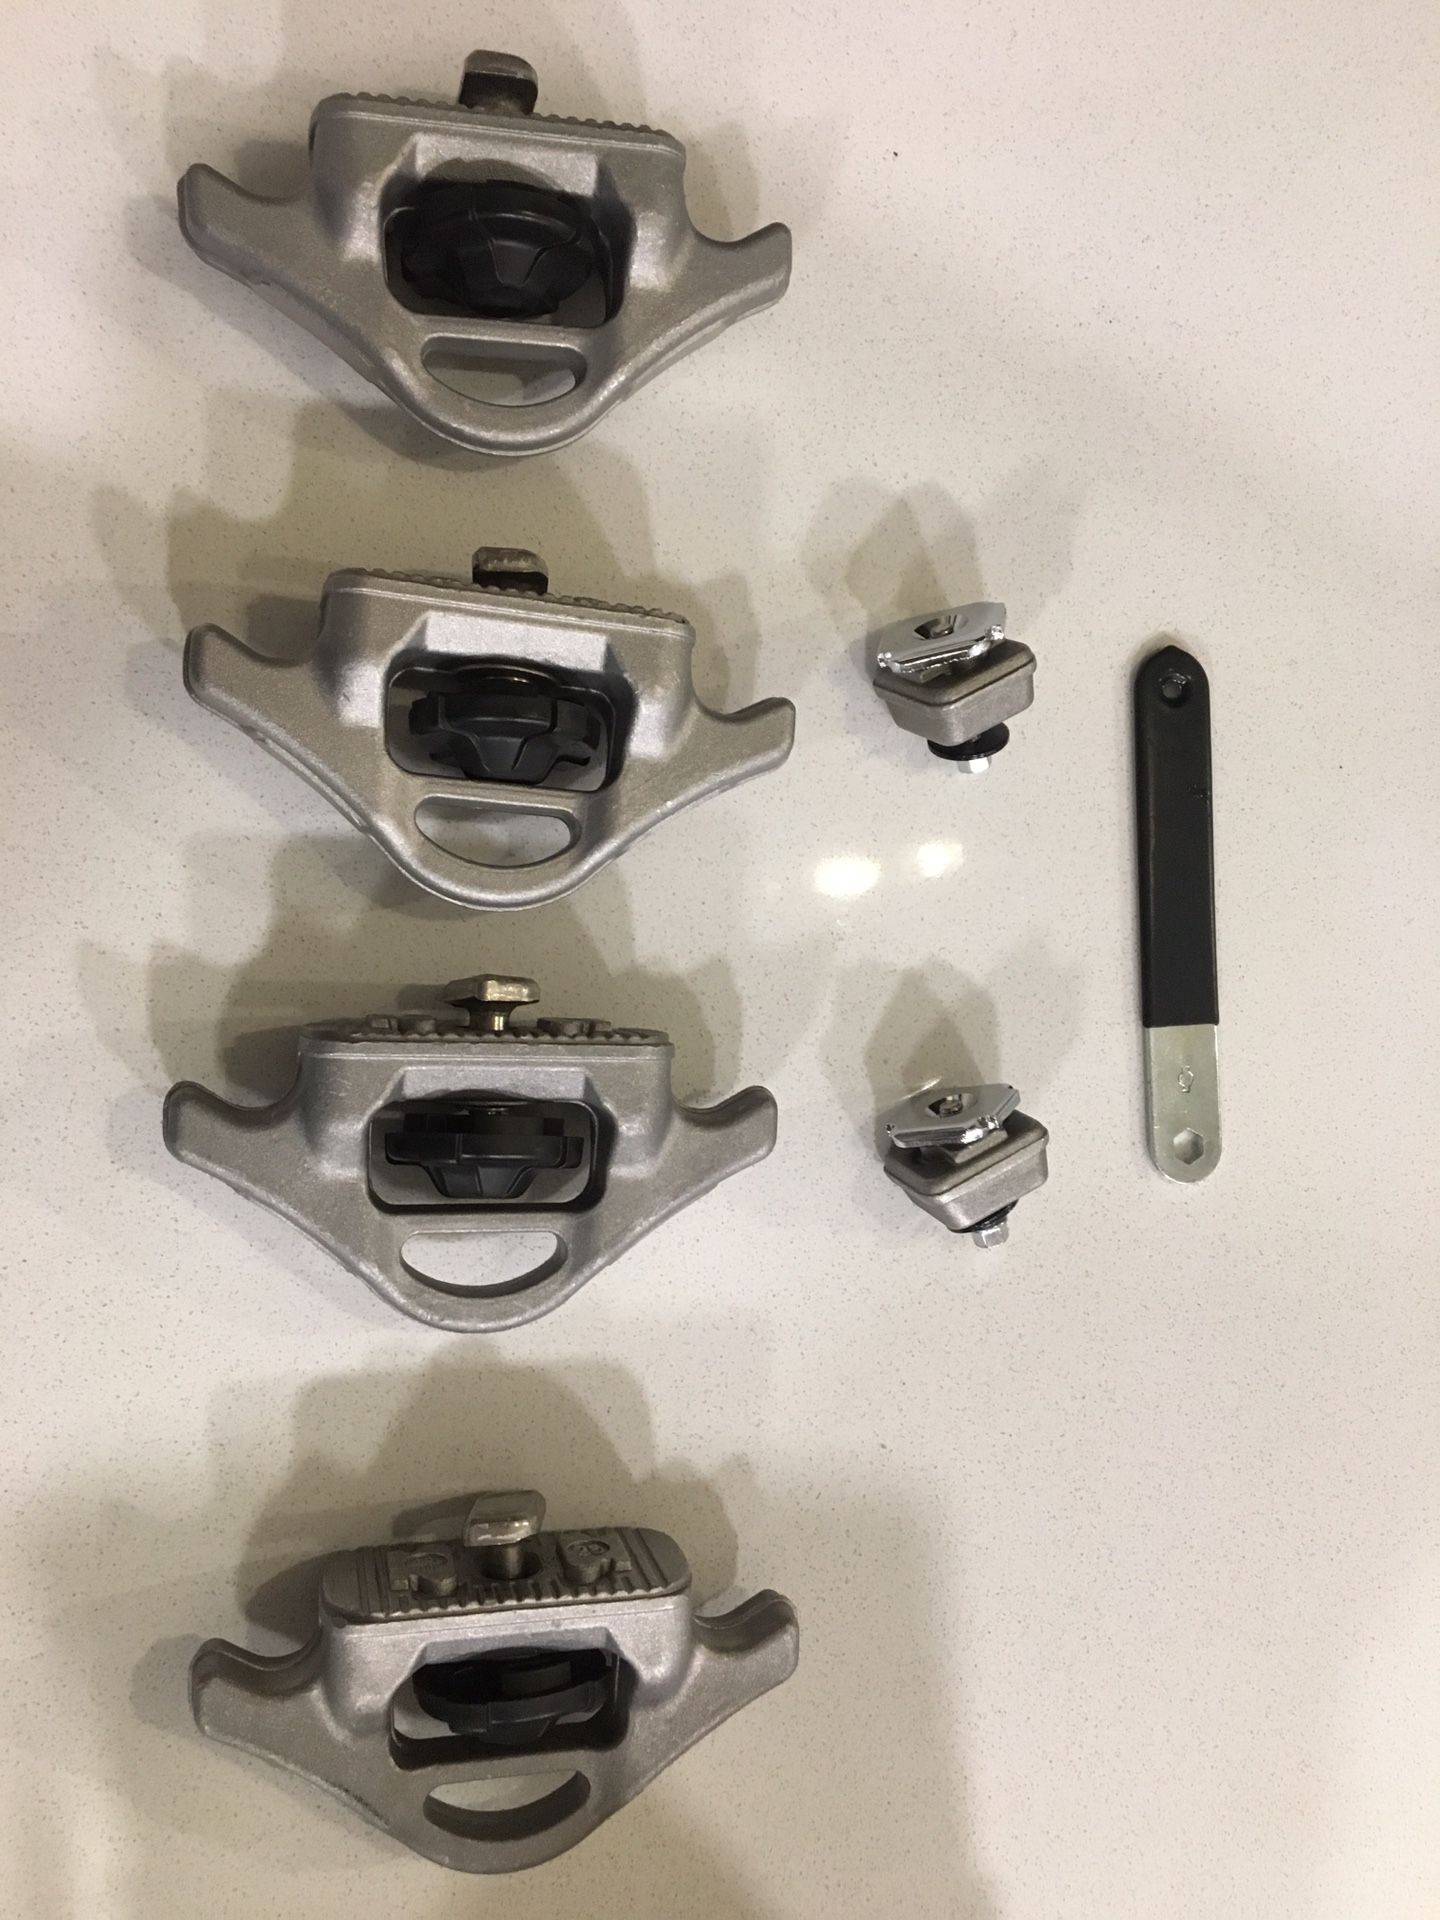 Nissan Tie-Down Cleats (x4 cleats, 2 knuckles, 1 tool)